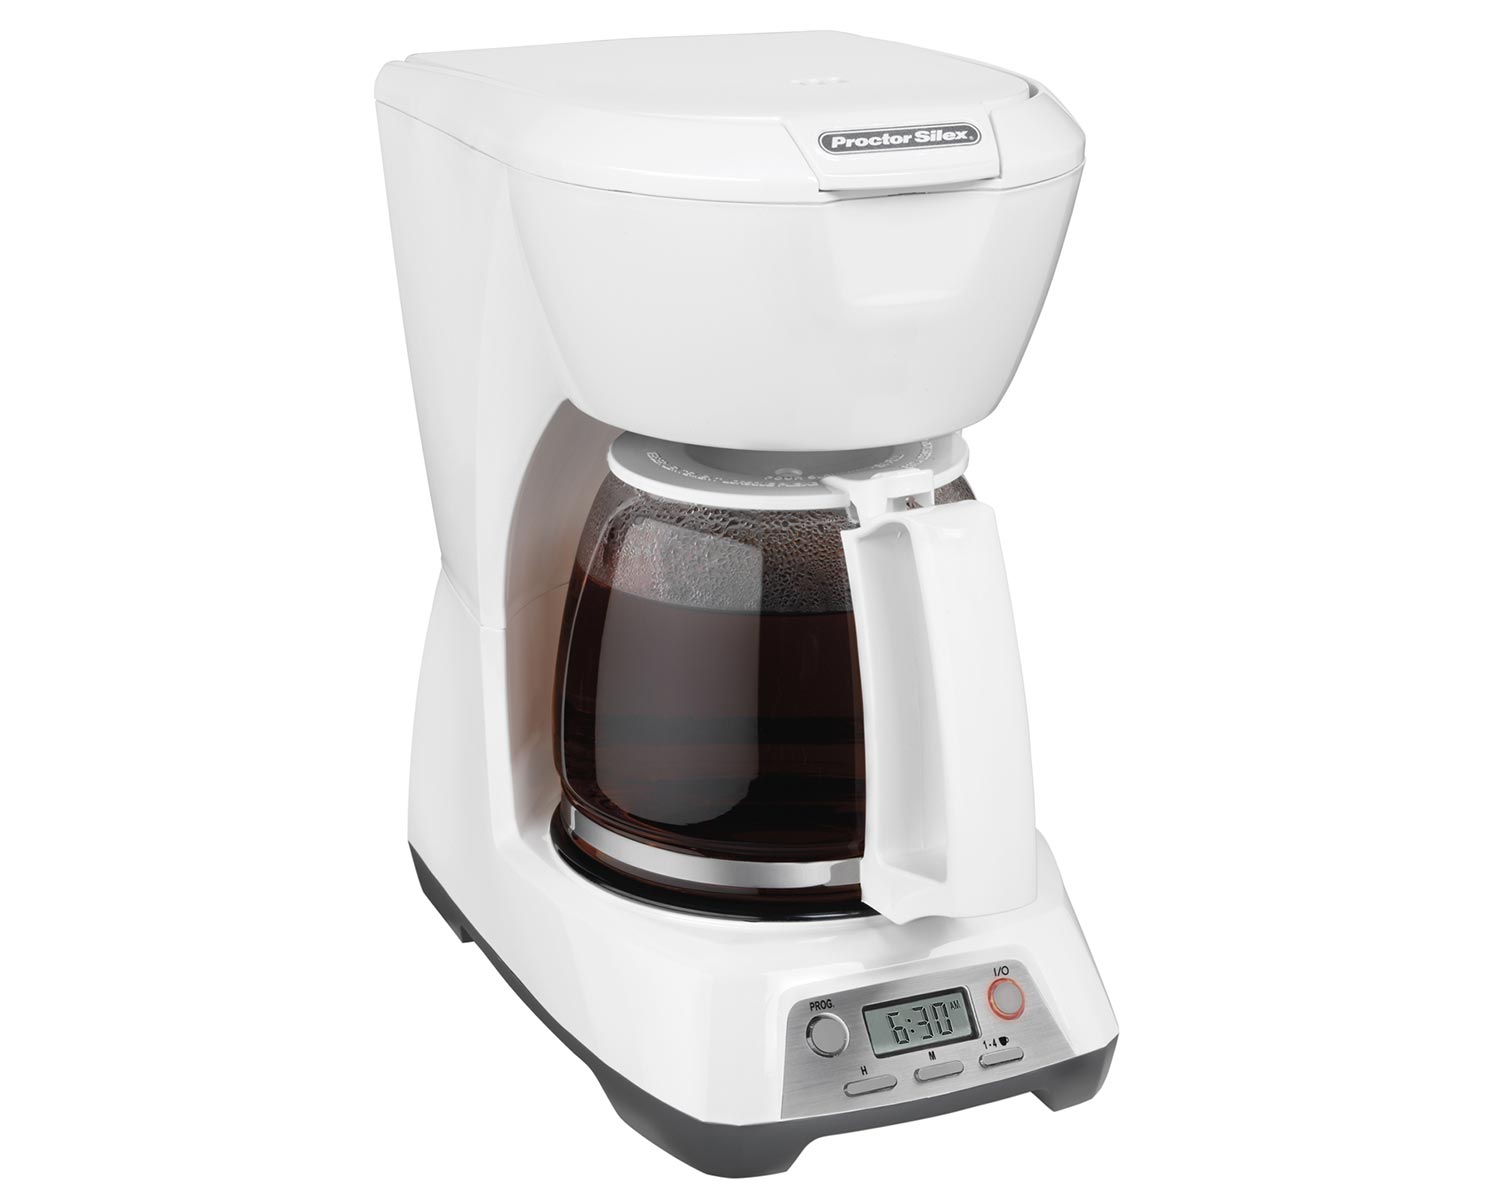 Programmable 12 Cup Coffee Maker (white)